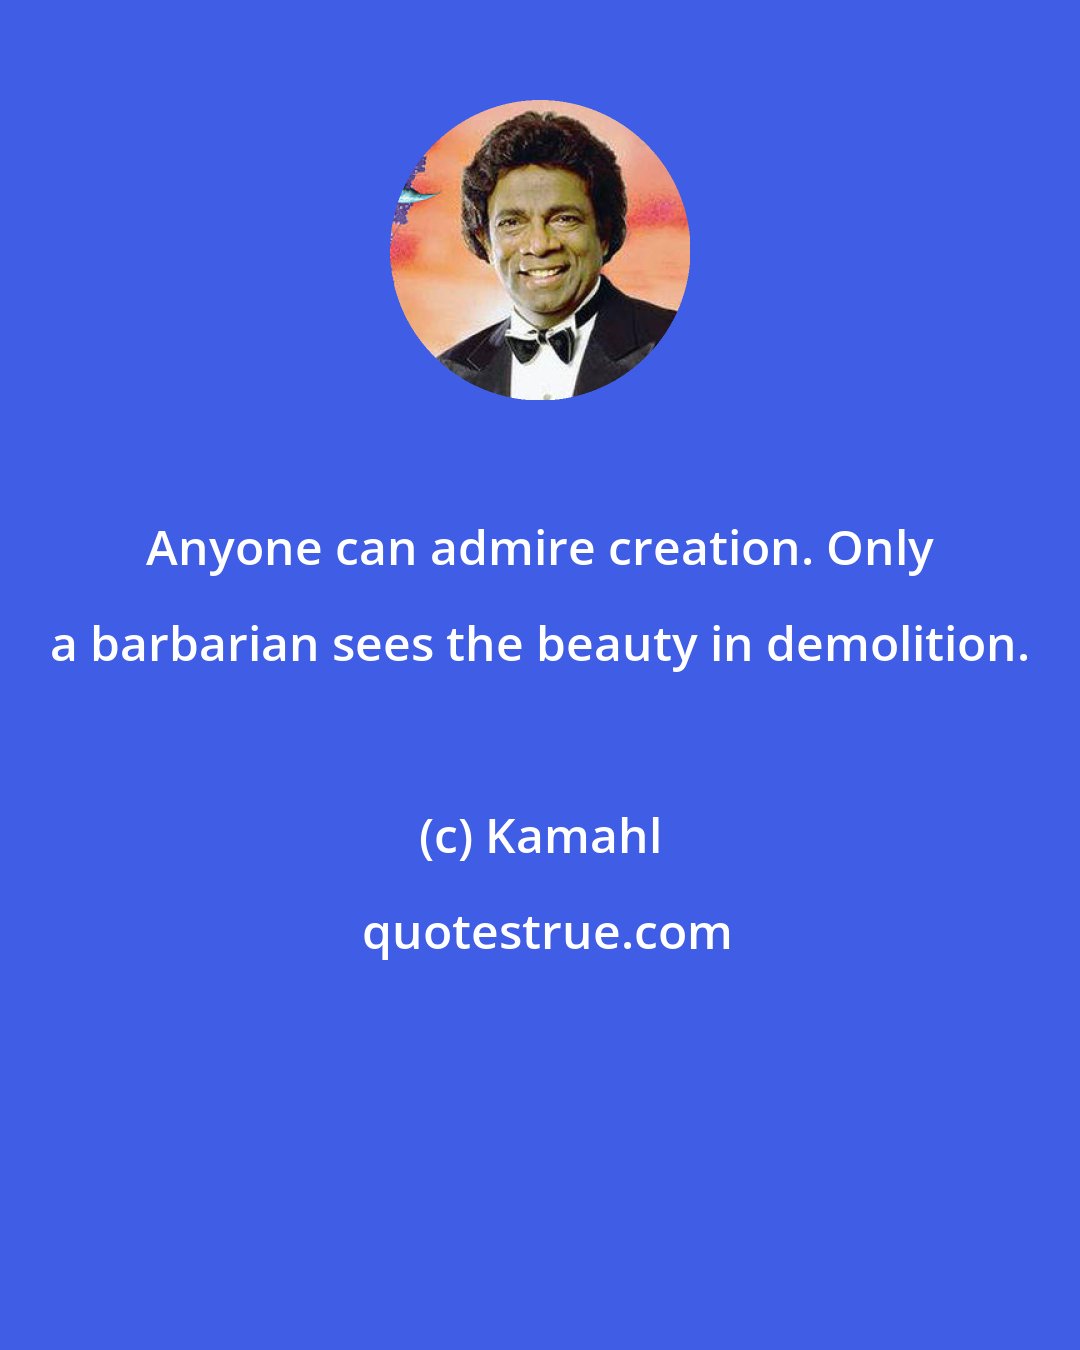 Kamahl: Anyone can admire creation. Only a barbarian sees the beauty in demolition.